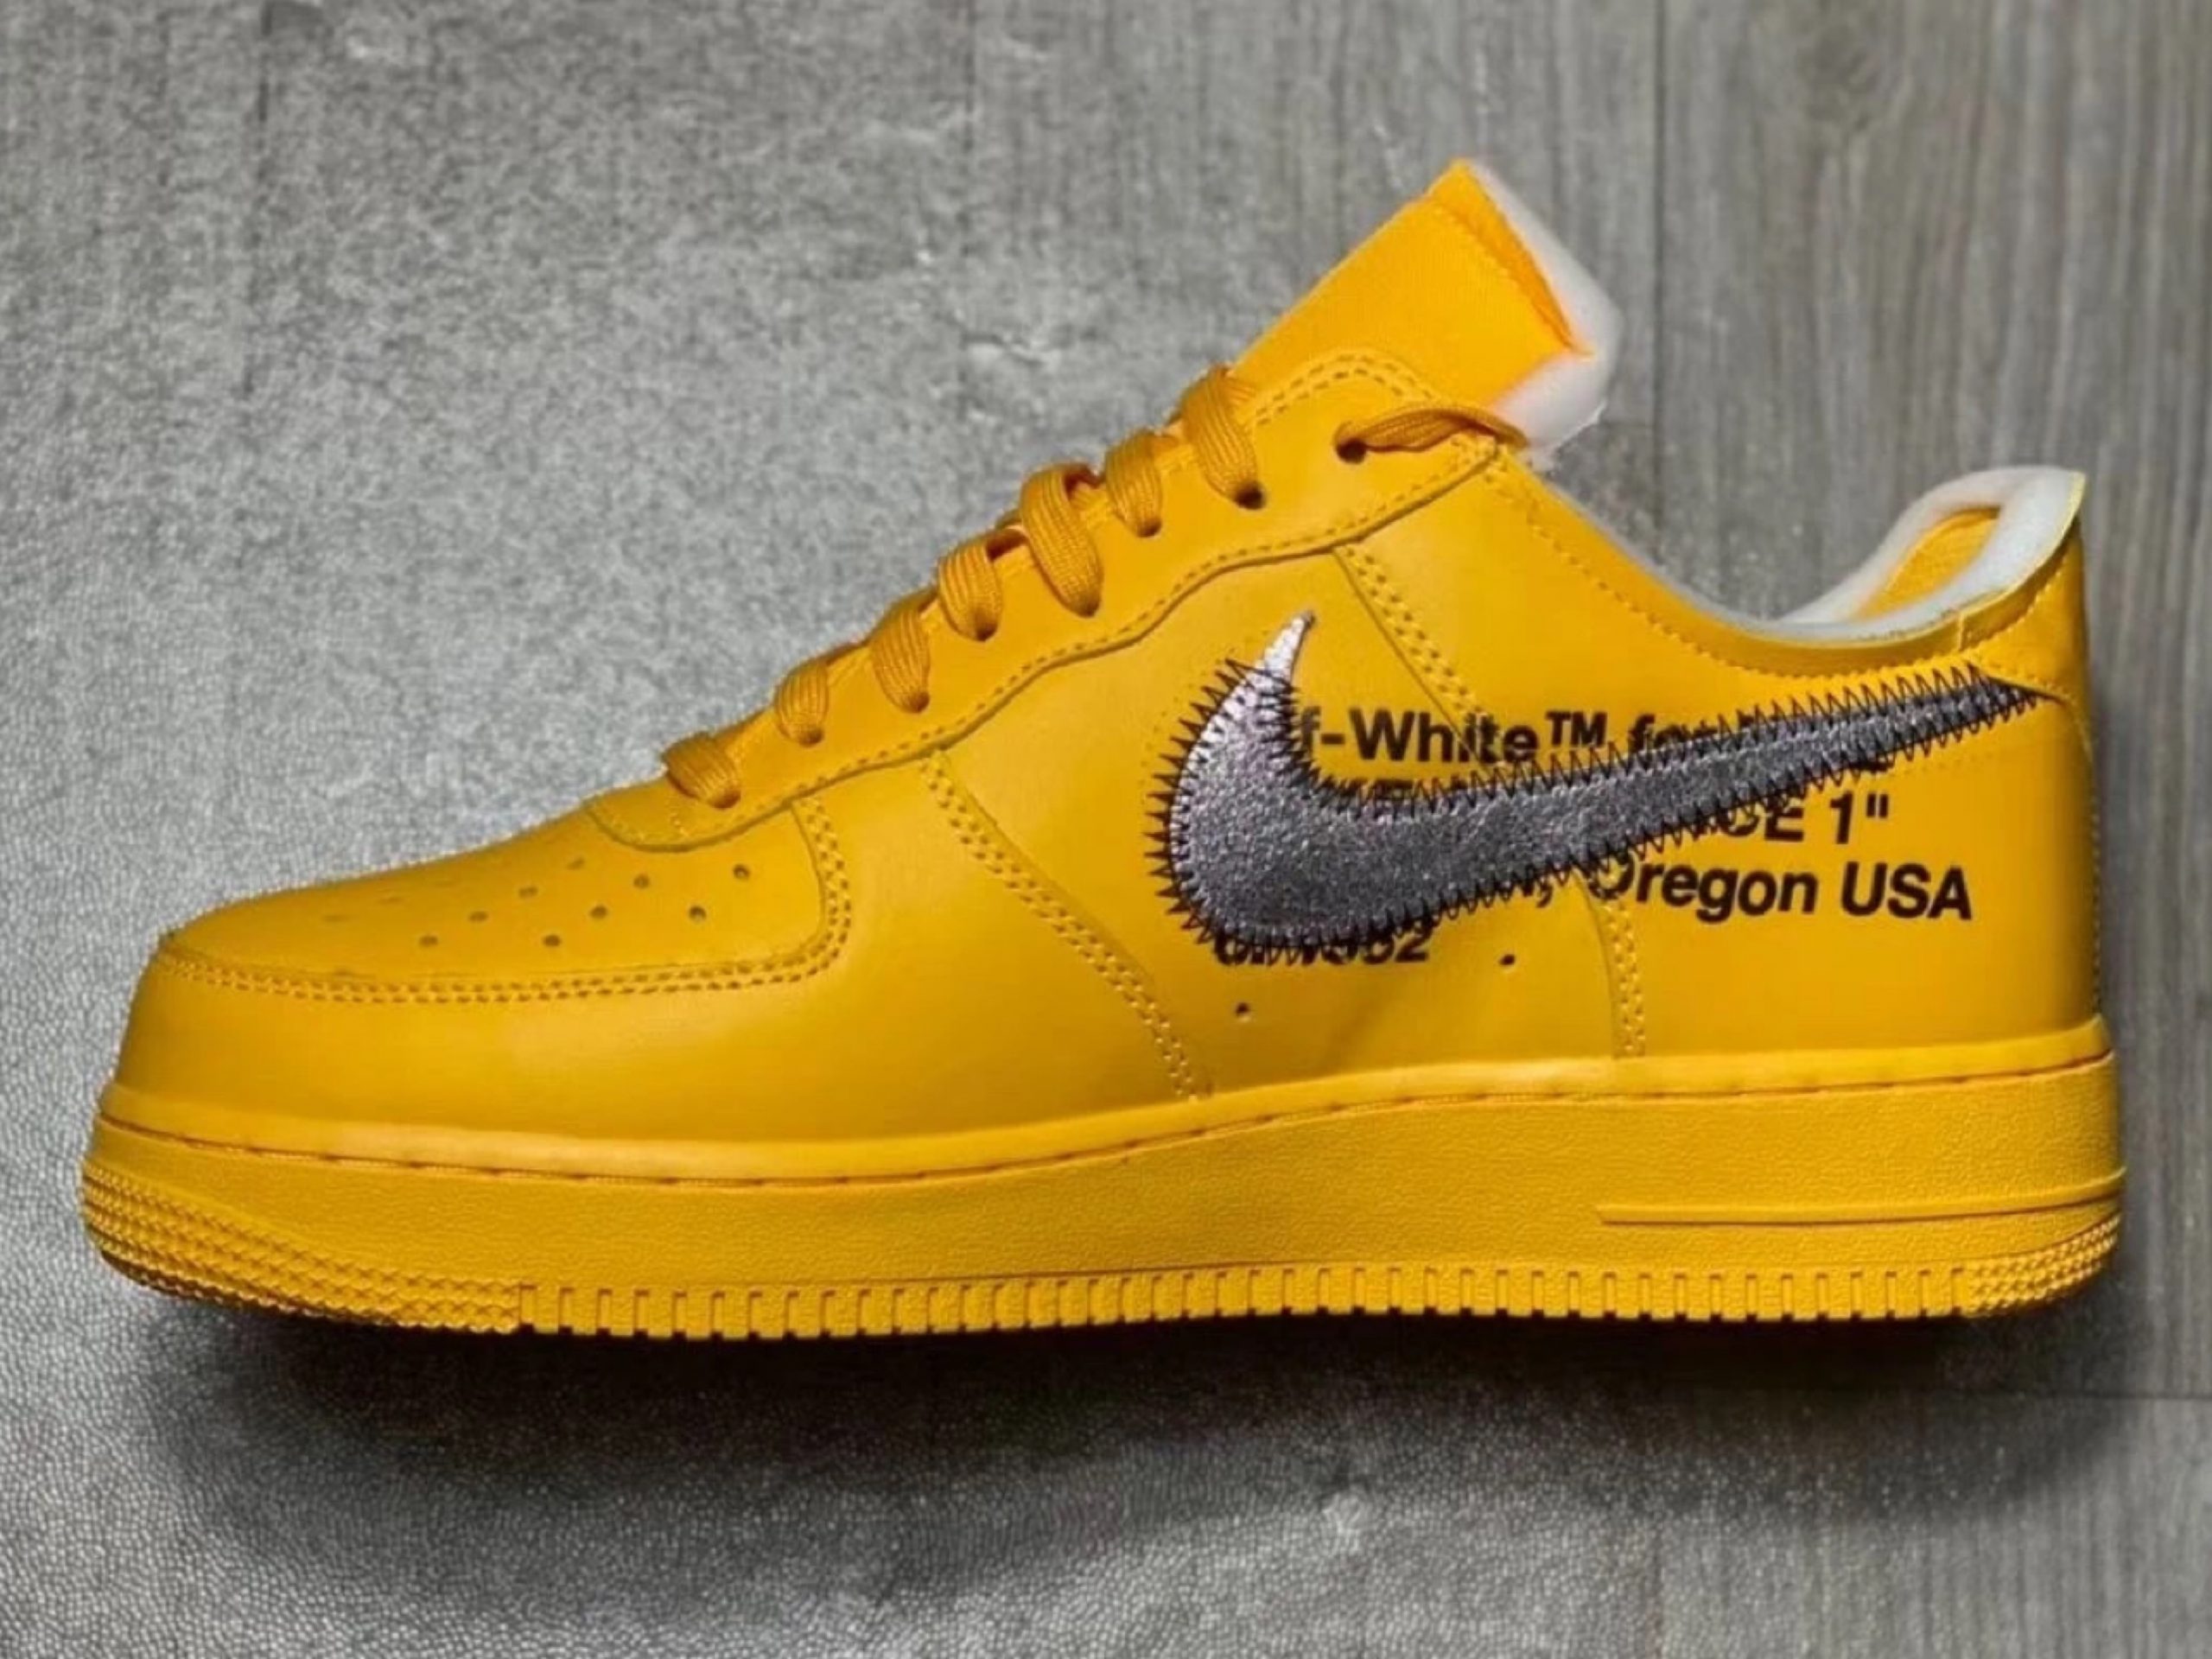 What Would You Rate the Off-White x Nike Air Force 1 Low University Gold?